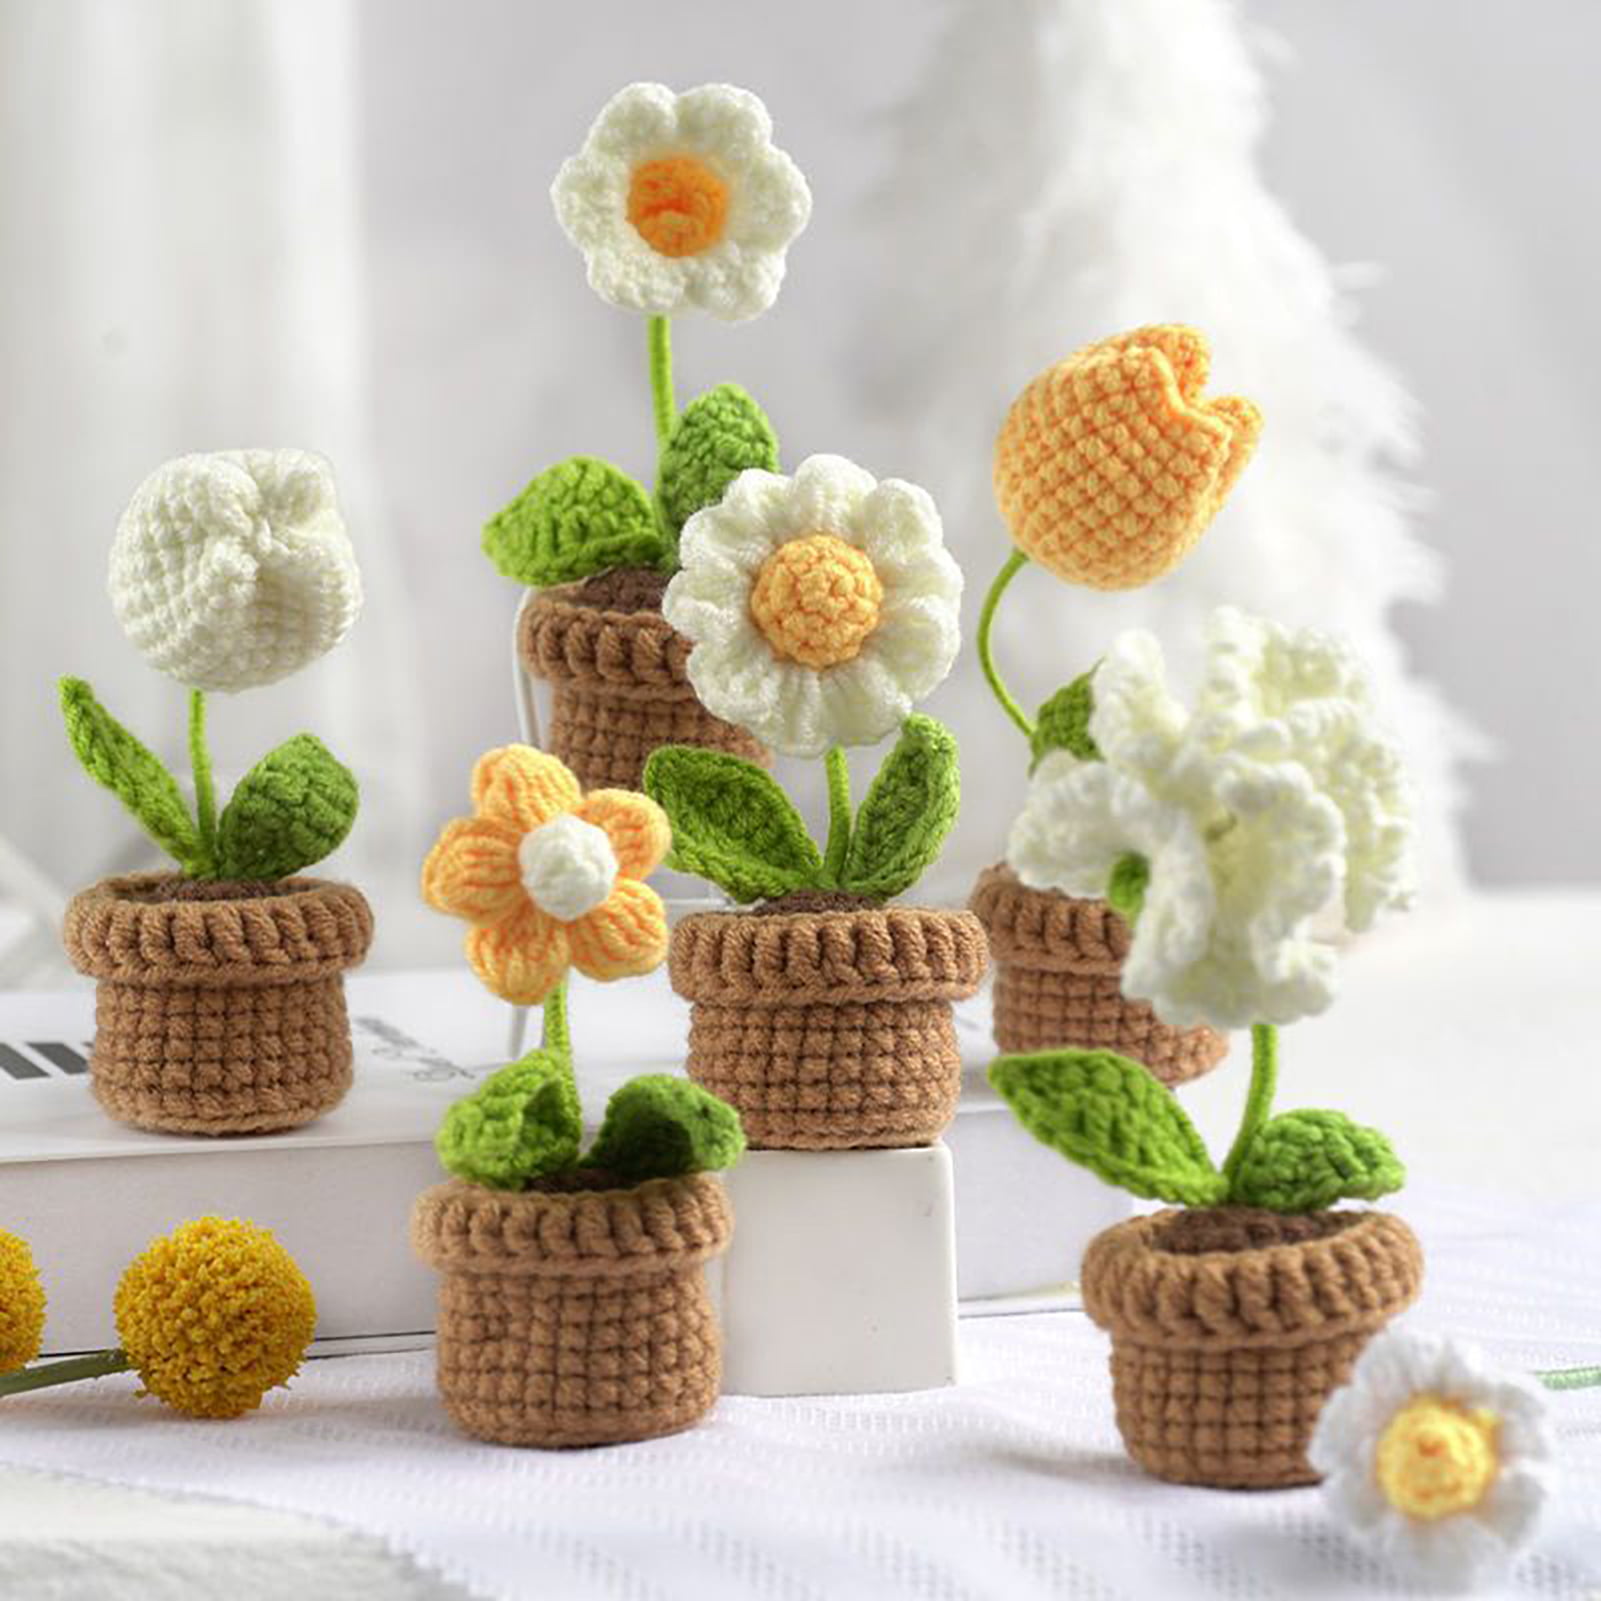 Scheam Crochet Kit,6 Pcs Potted Flowers Crochet Kit for Beginners and  Experts,DIY Beginner Craft Complete Crochet Set （Yellow/Adults）for Mother's  Day